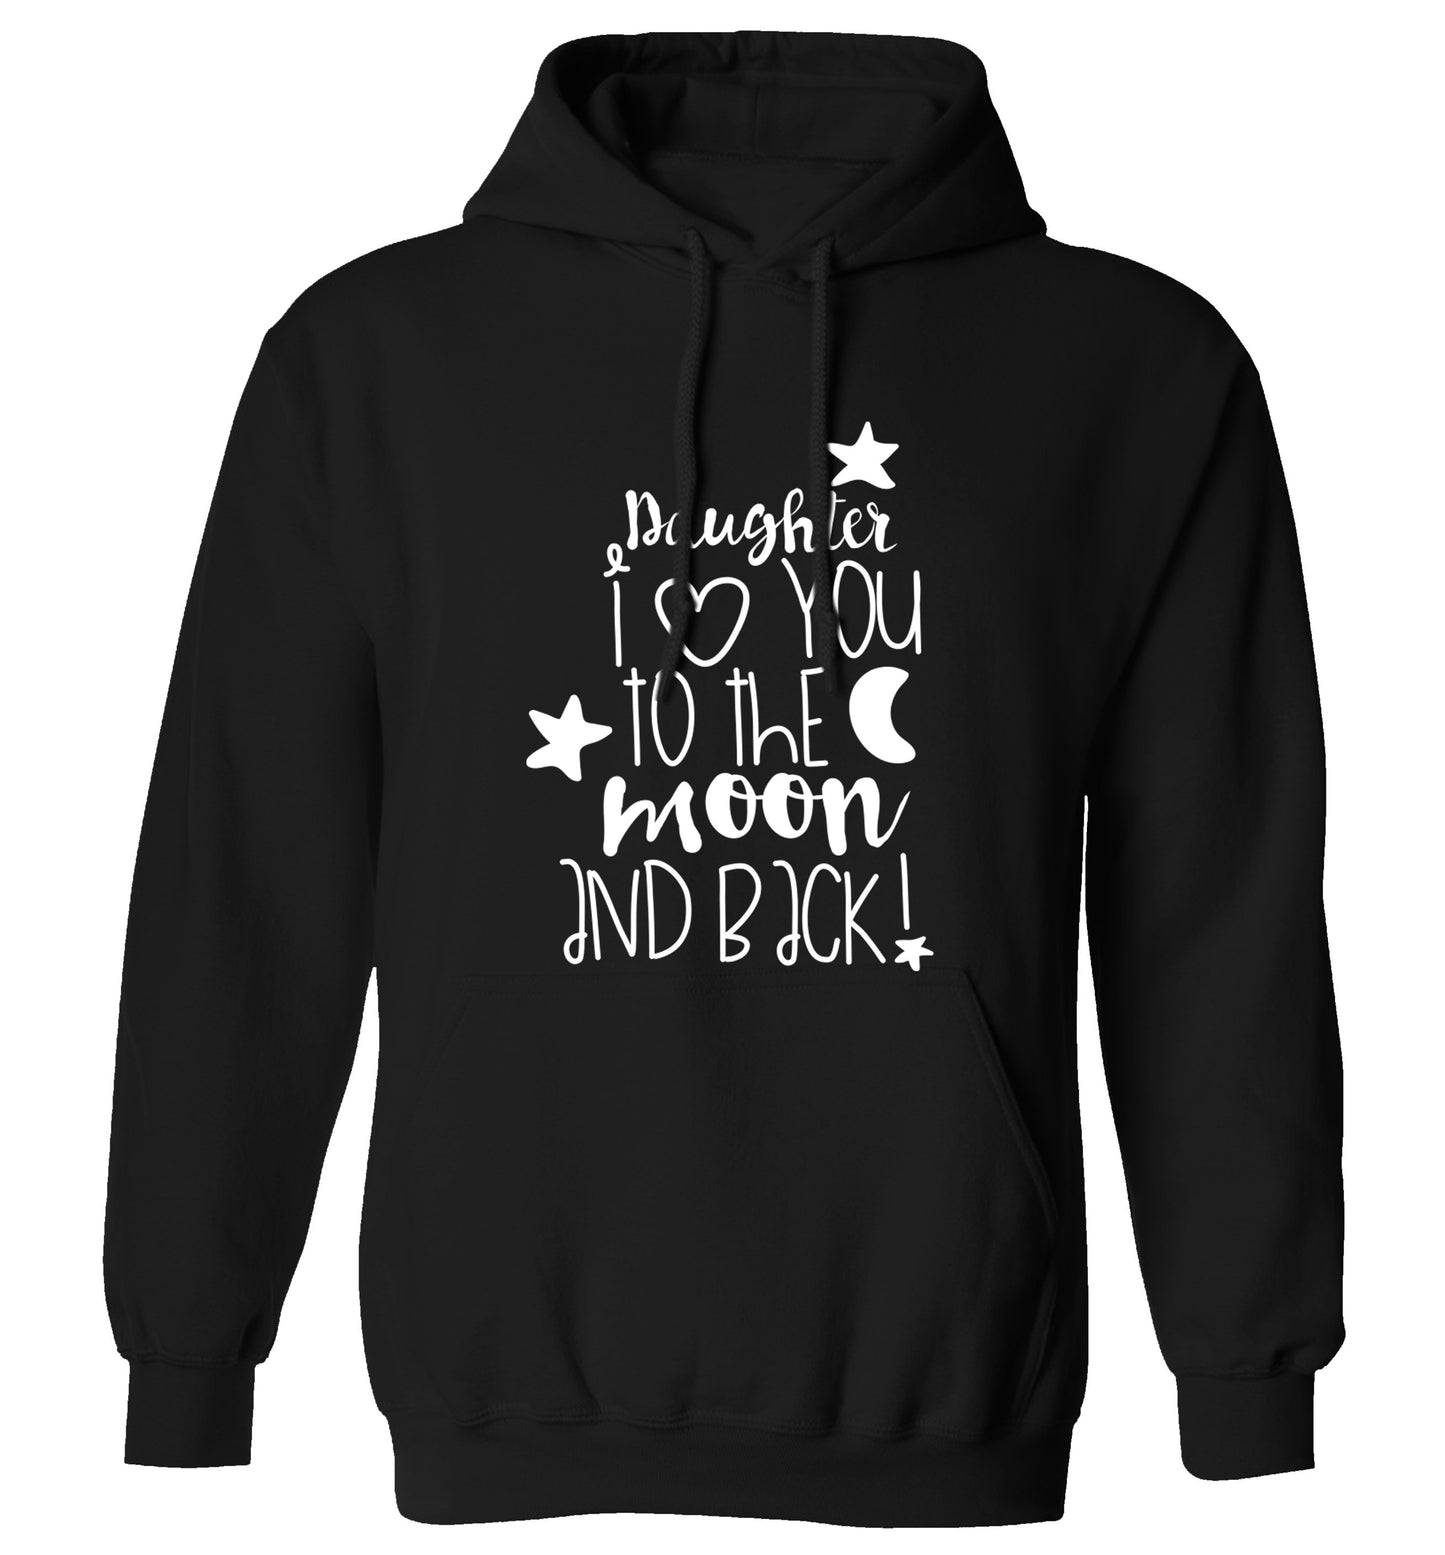 Daughter I love you to the moon and back adults unisex black hoodie 2XL